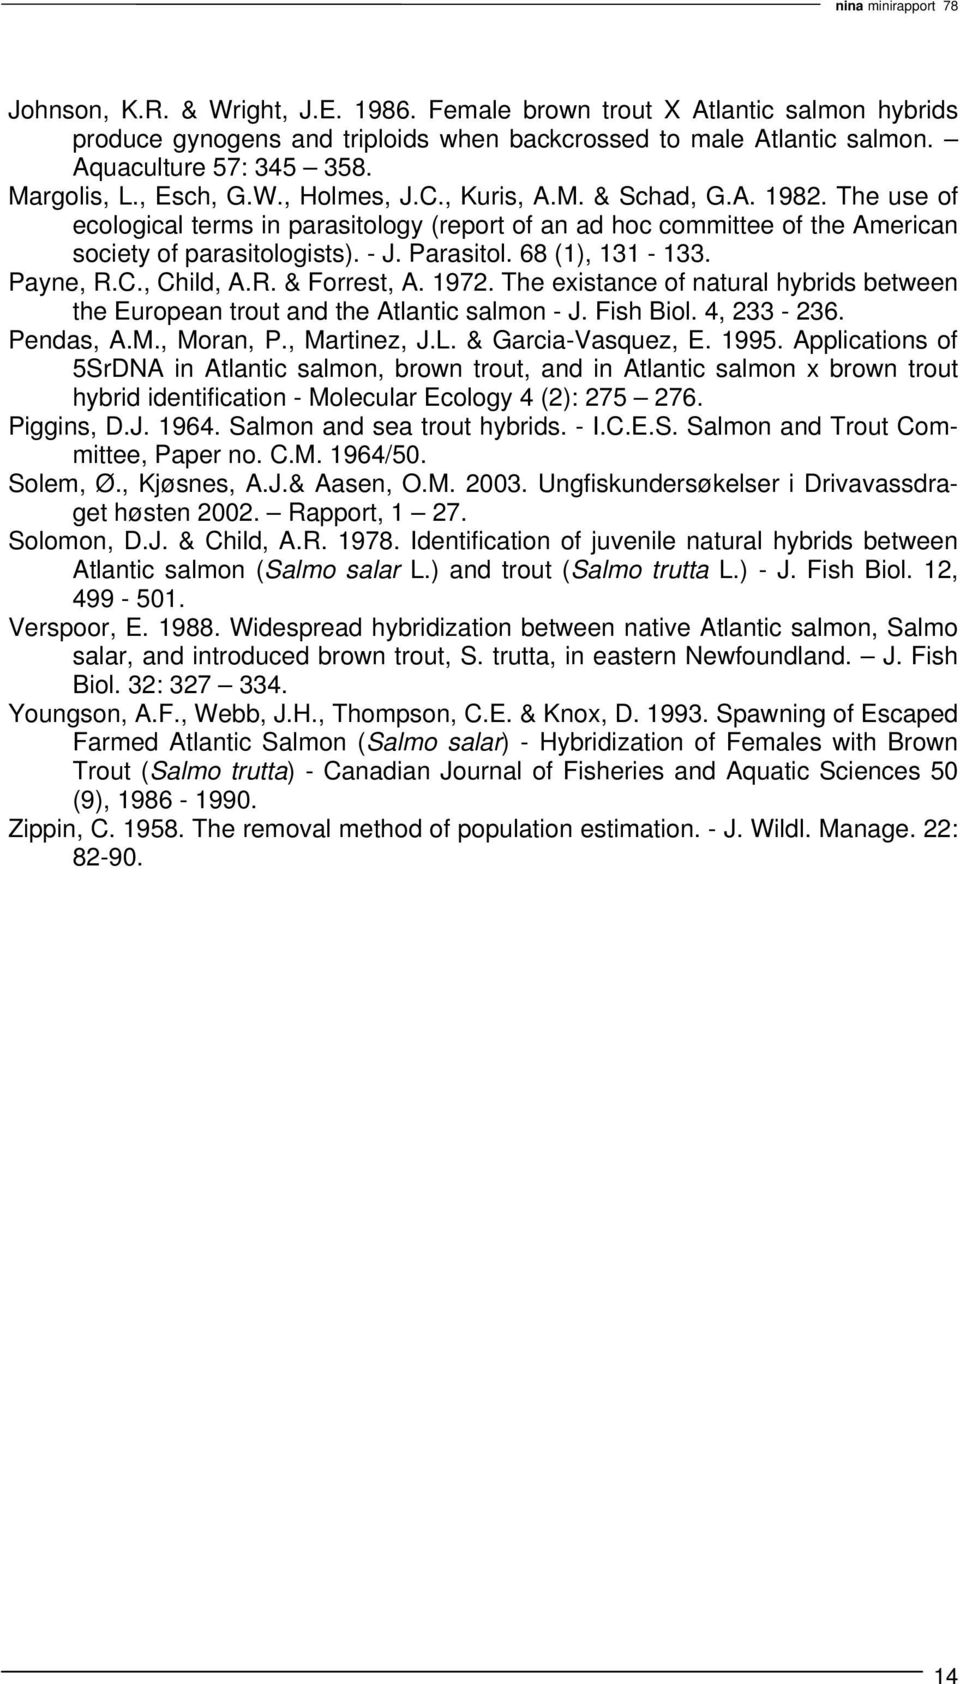 68 (1), 131-133. Payne, R.C., Child, A.R. & Forrest, A. 1972. The existance of natural hybrids between the European trout and the Atlantic salmon - J. Fish Biol. 4, 233-236. Pendas, A.M., Moran, P.